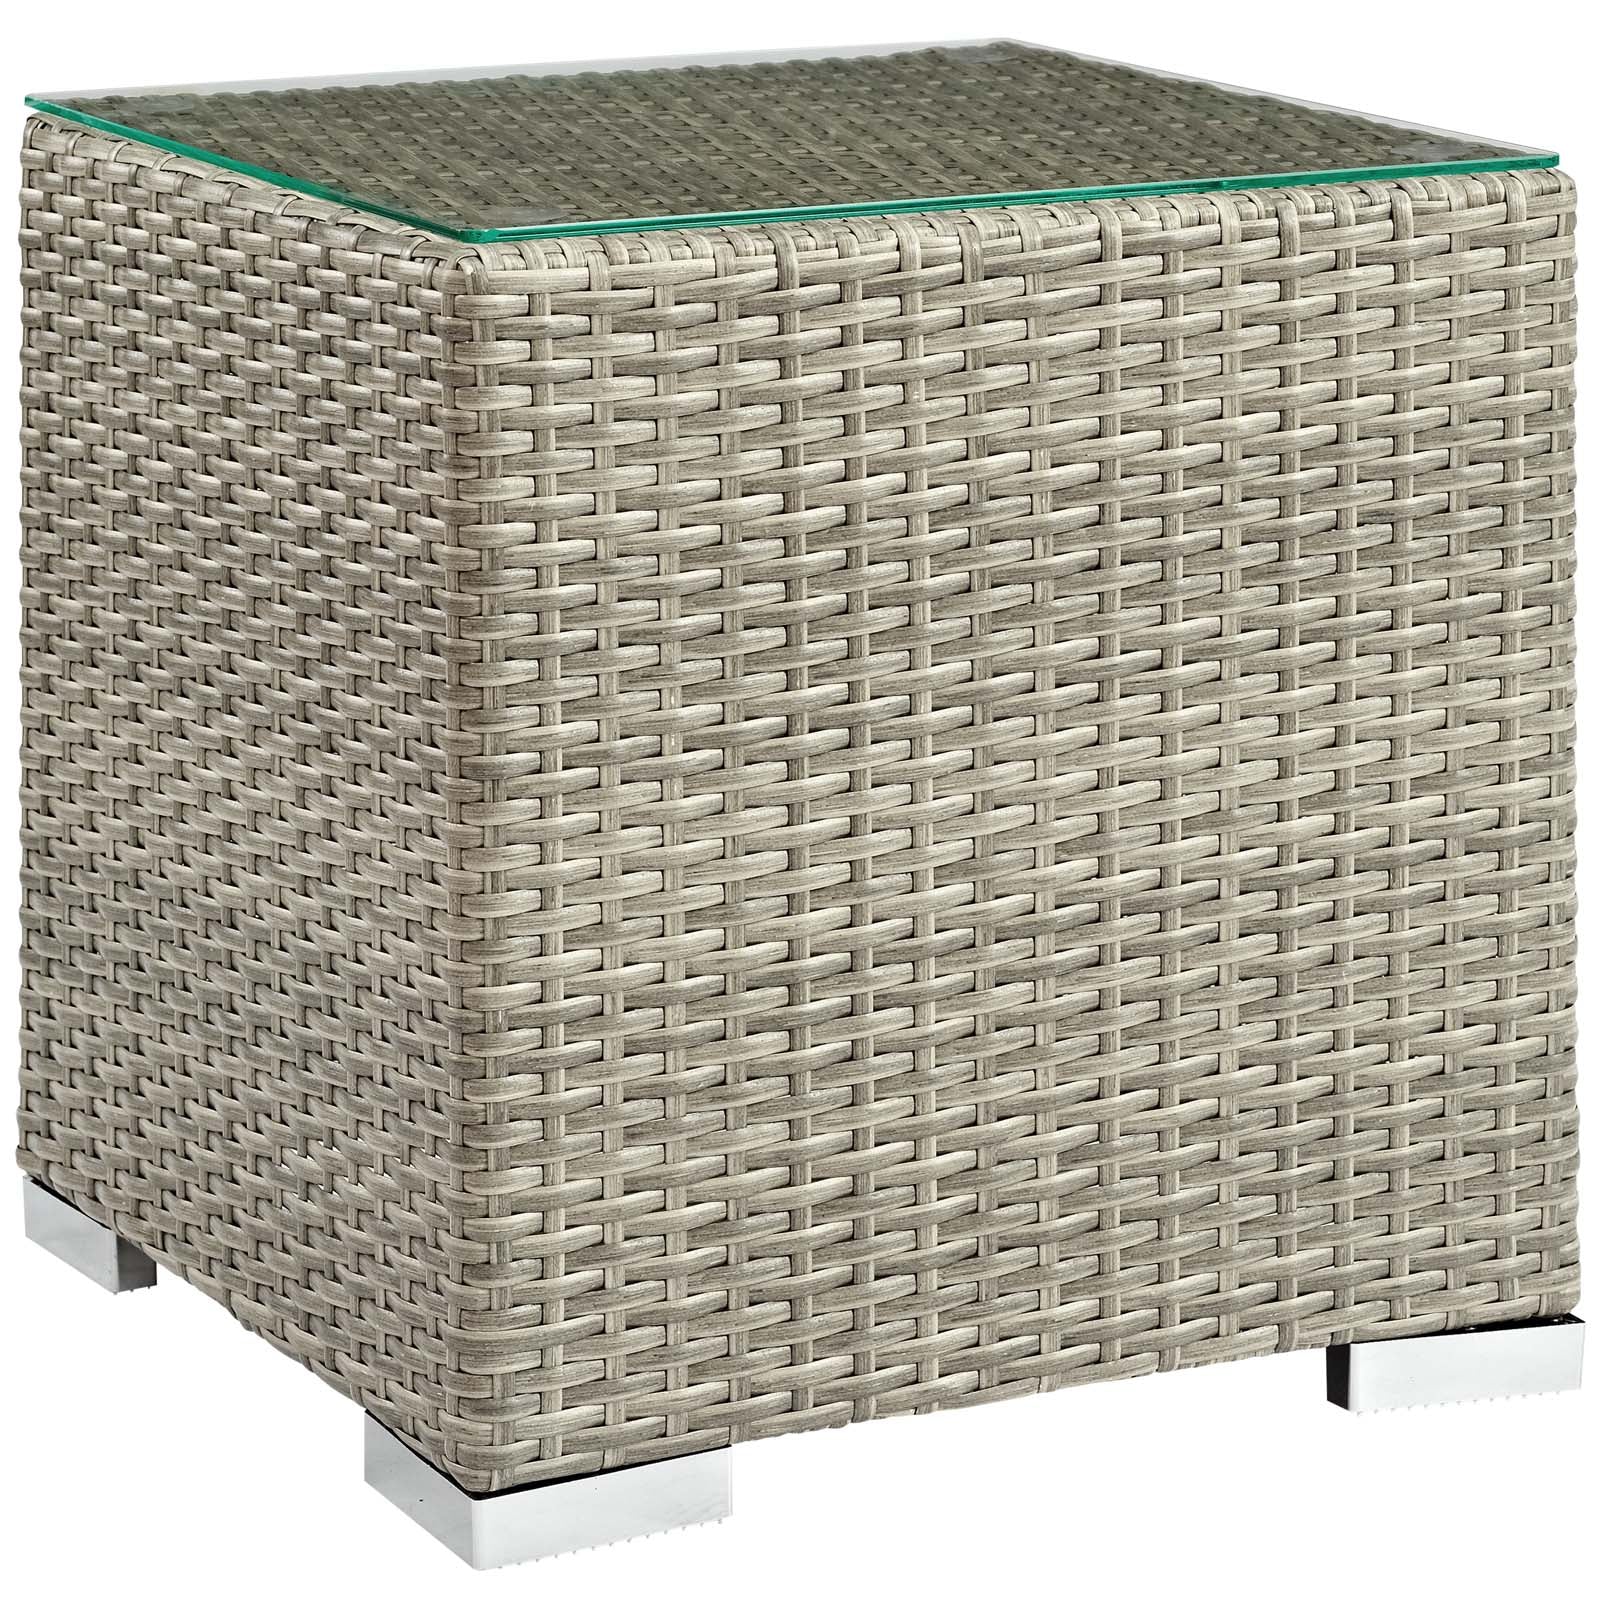 Repose Wicker Rattan Outdoor Patio Side End Table - Bedside Table - Side Table